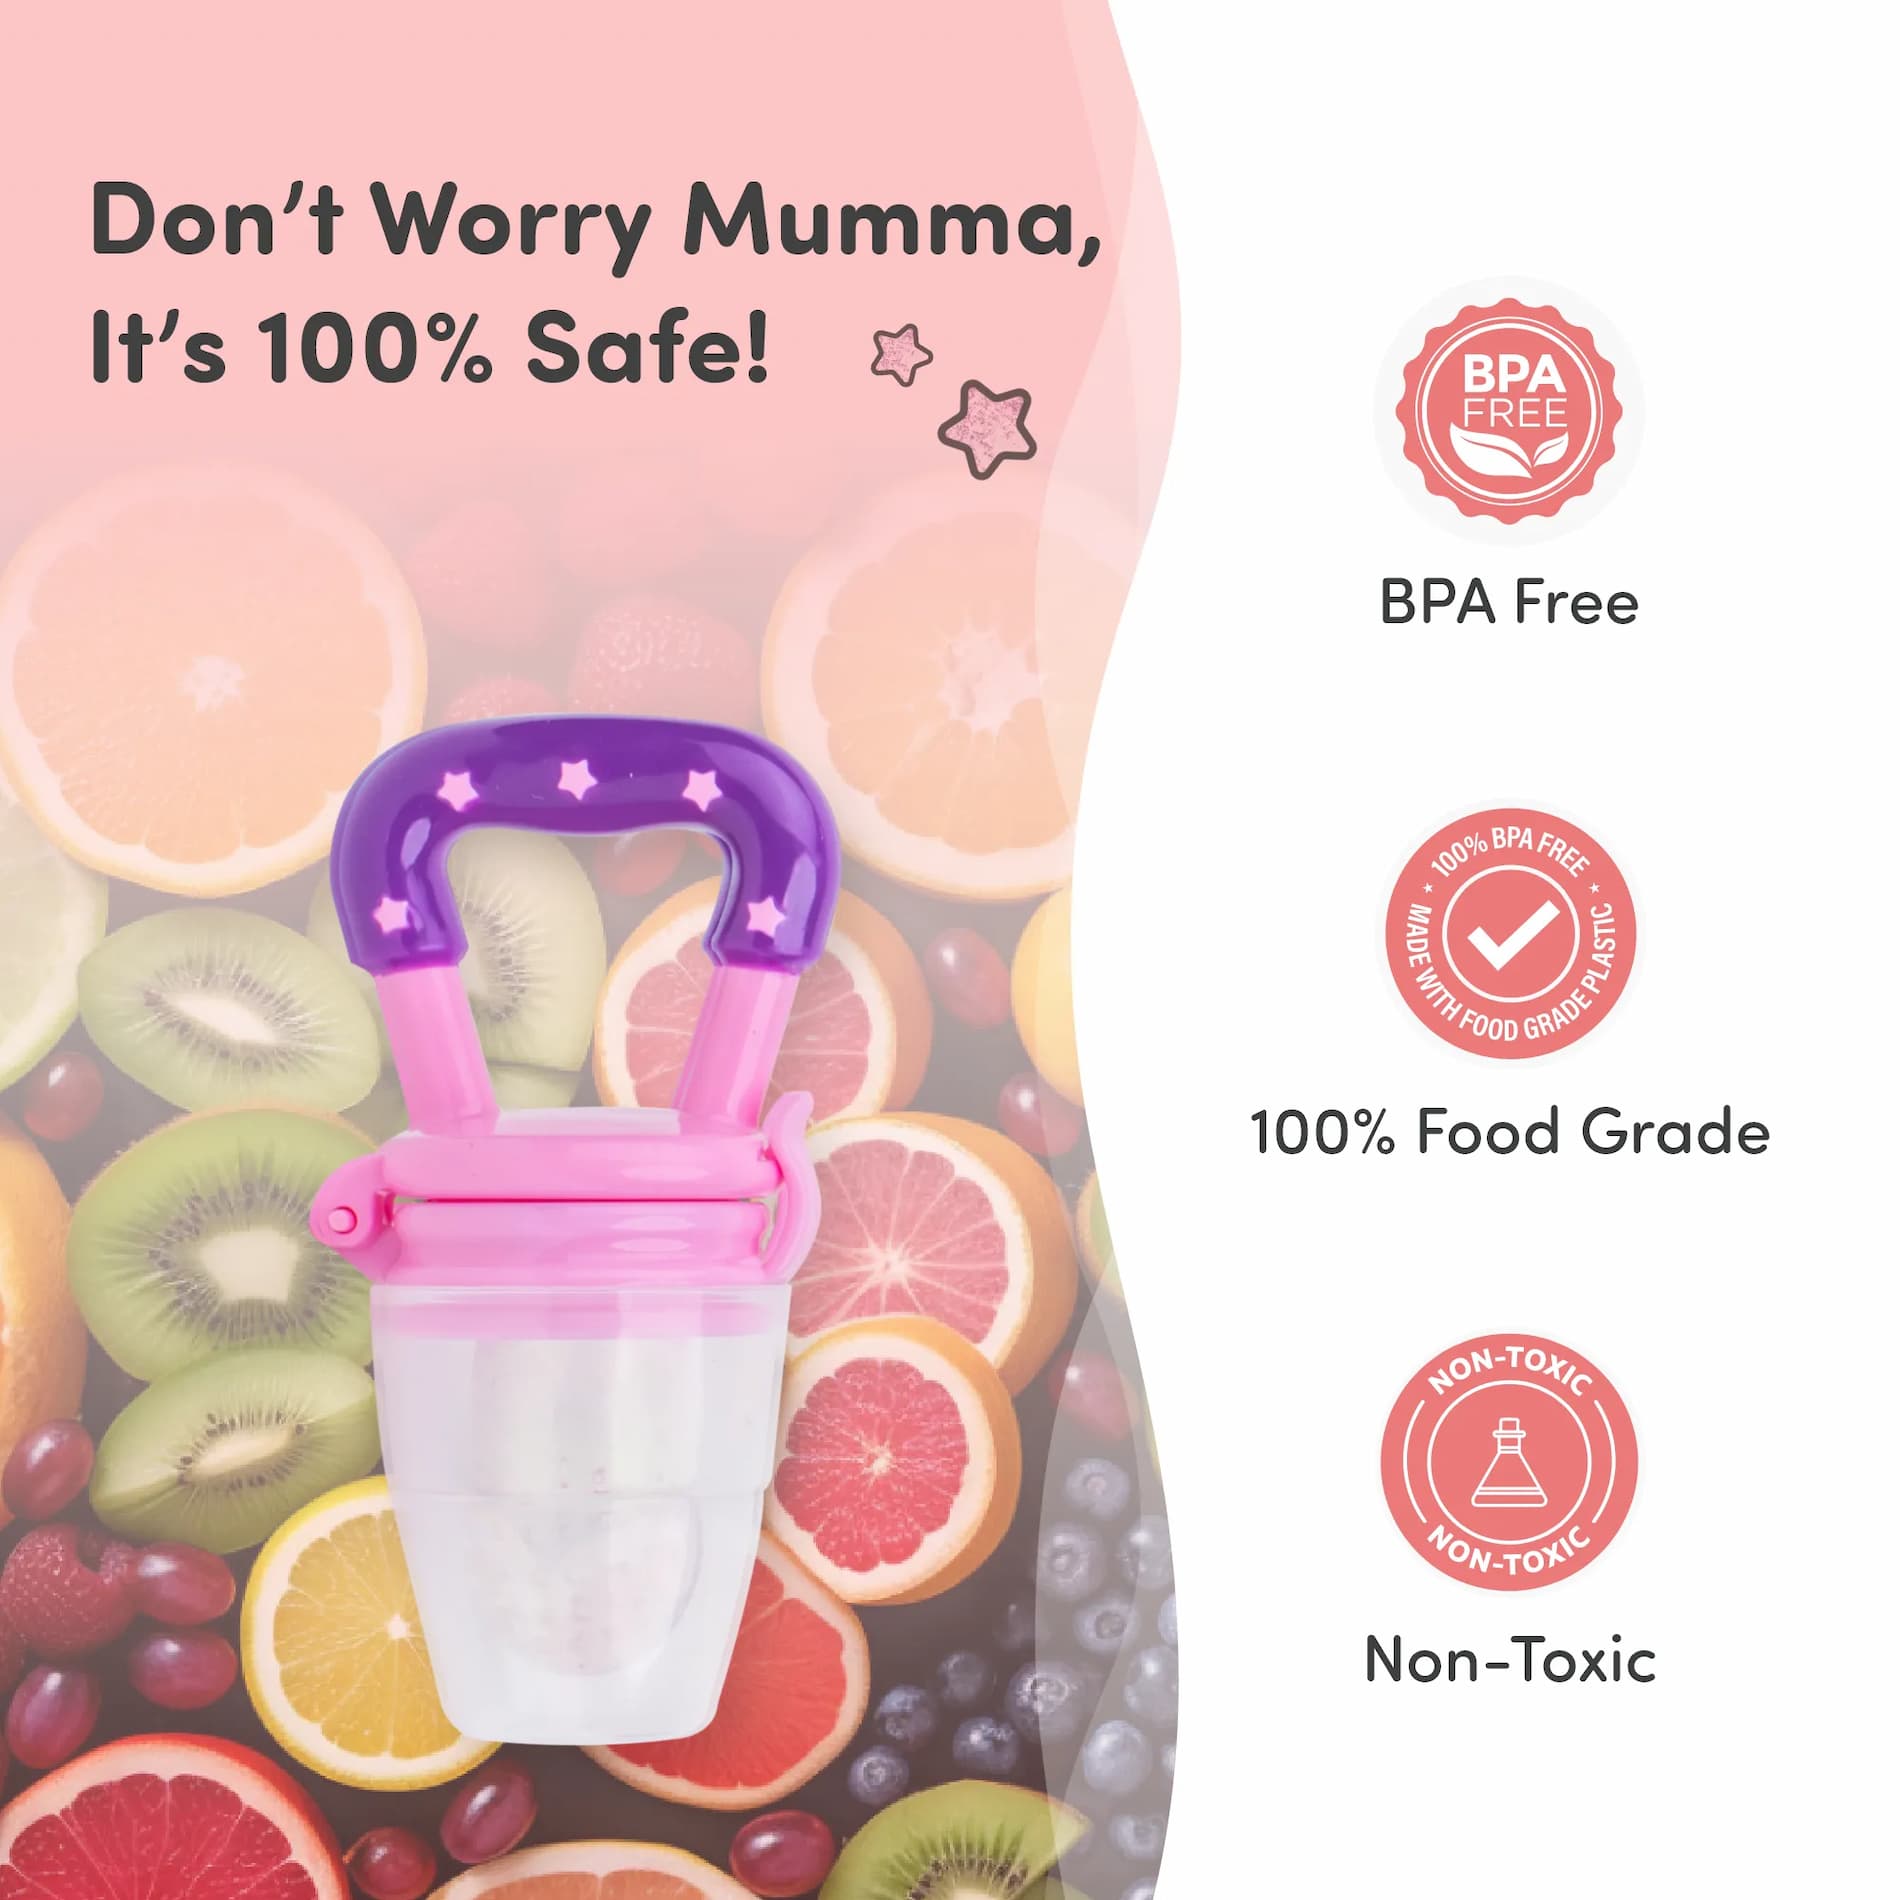 Feels Natural Ultra Soft Fruit & Food Nibbler- Pink | Convenient to Introduce Fruits & Veggies to Baby | Ultra-soft Silicone Mesh for Easy Chewing | Easy One Snap Filling | Helps Relieve Teething Discomfort